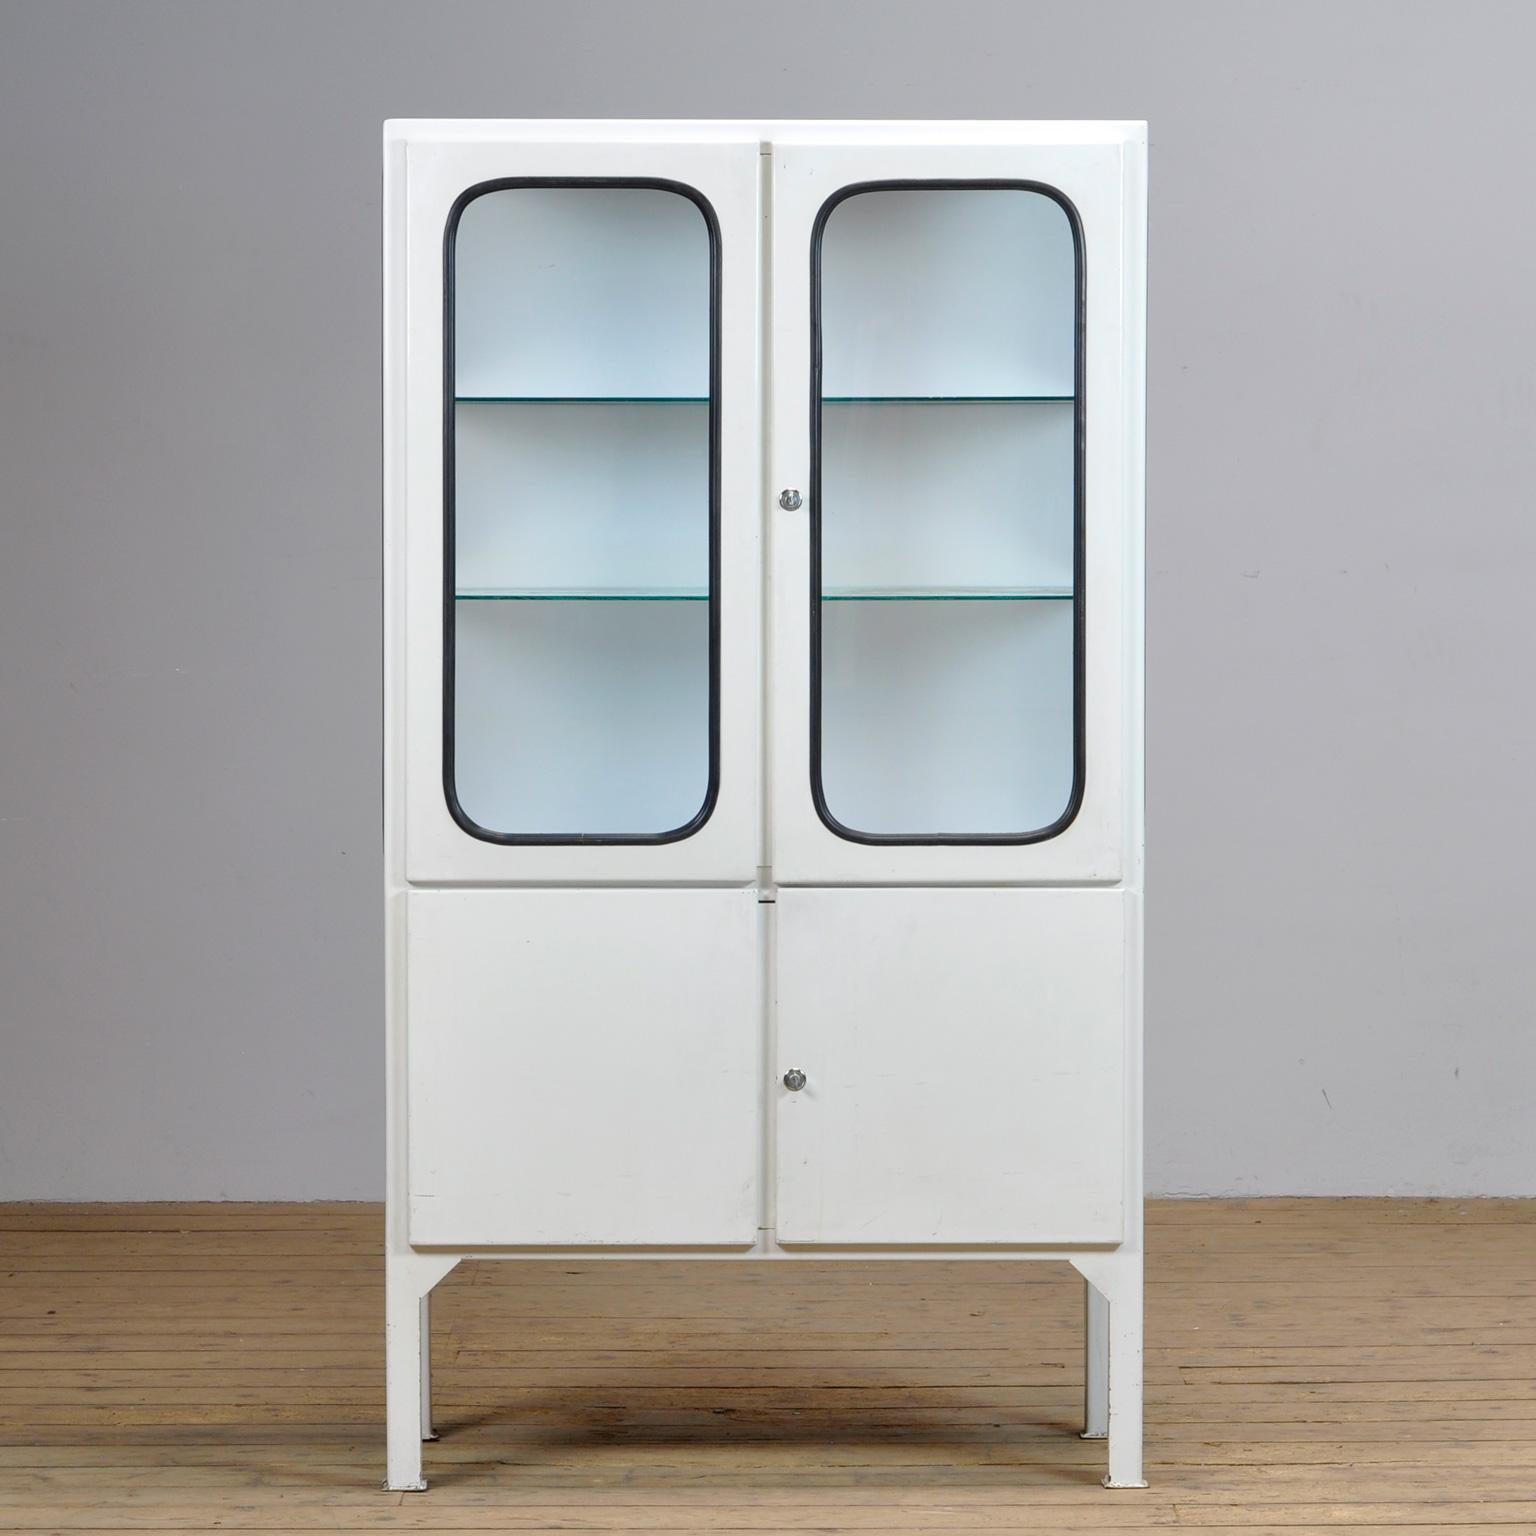 This medicine cabinet was designed in the 1970s and was produced circa 1975 in hungary. It is made from iron and antique glass, and the glass is held by a black rubber strip. The cabinet features two adjustable glass shelves and functioning